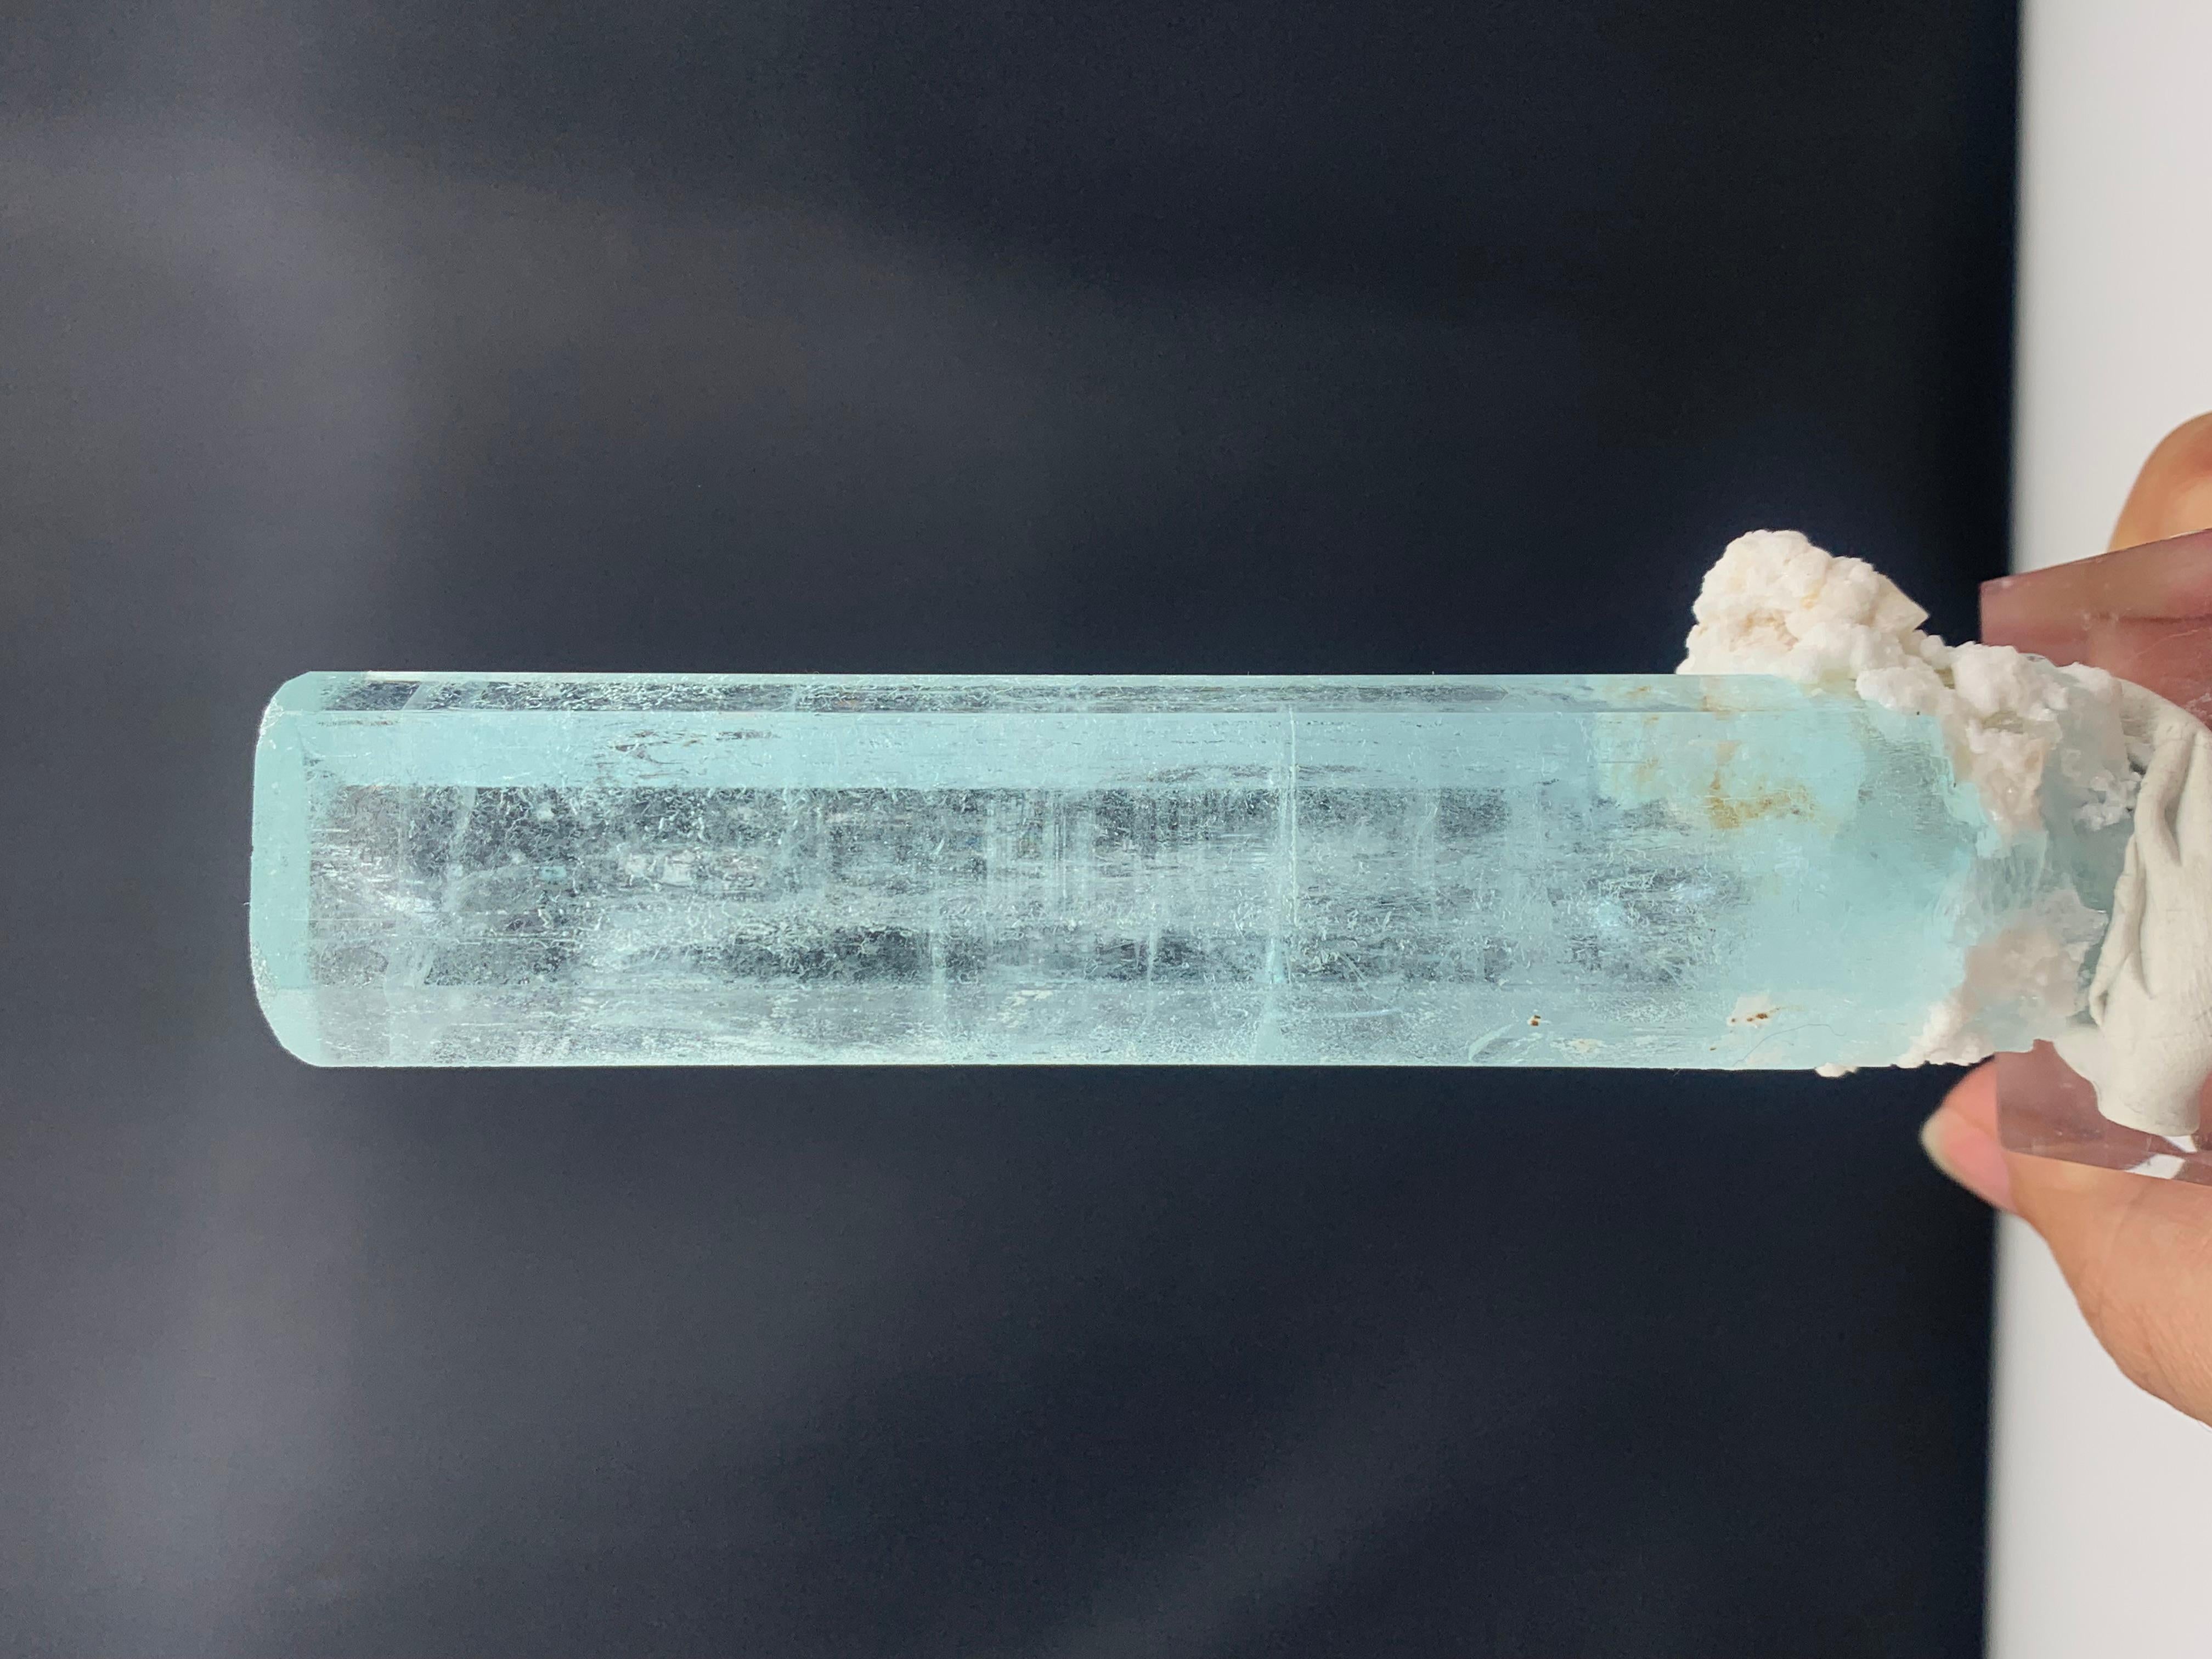 Stunning Natural Aquamarine Specimen From Nagar Valley, Pakistan 
WEIGHT: 100 gram
DIMENSIONS: 11.5 x 2.4 x 1.7 Cm
ORIGIN: Nagar Valley, Gilgit Baltistan Pakistan 
TREATMENT: None
Aquamarine is a pale-blue to light-green variety of beryl. The